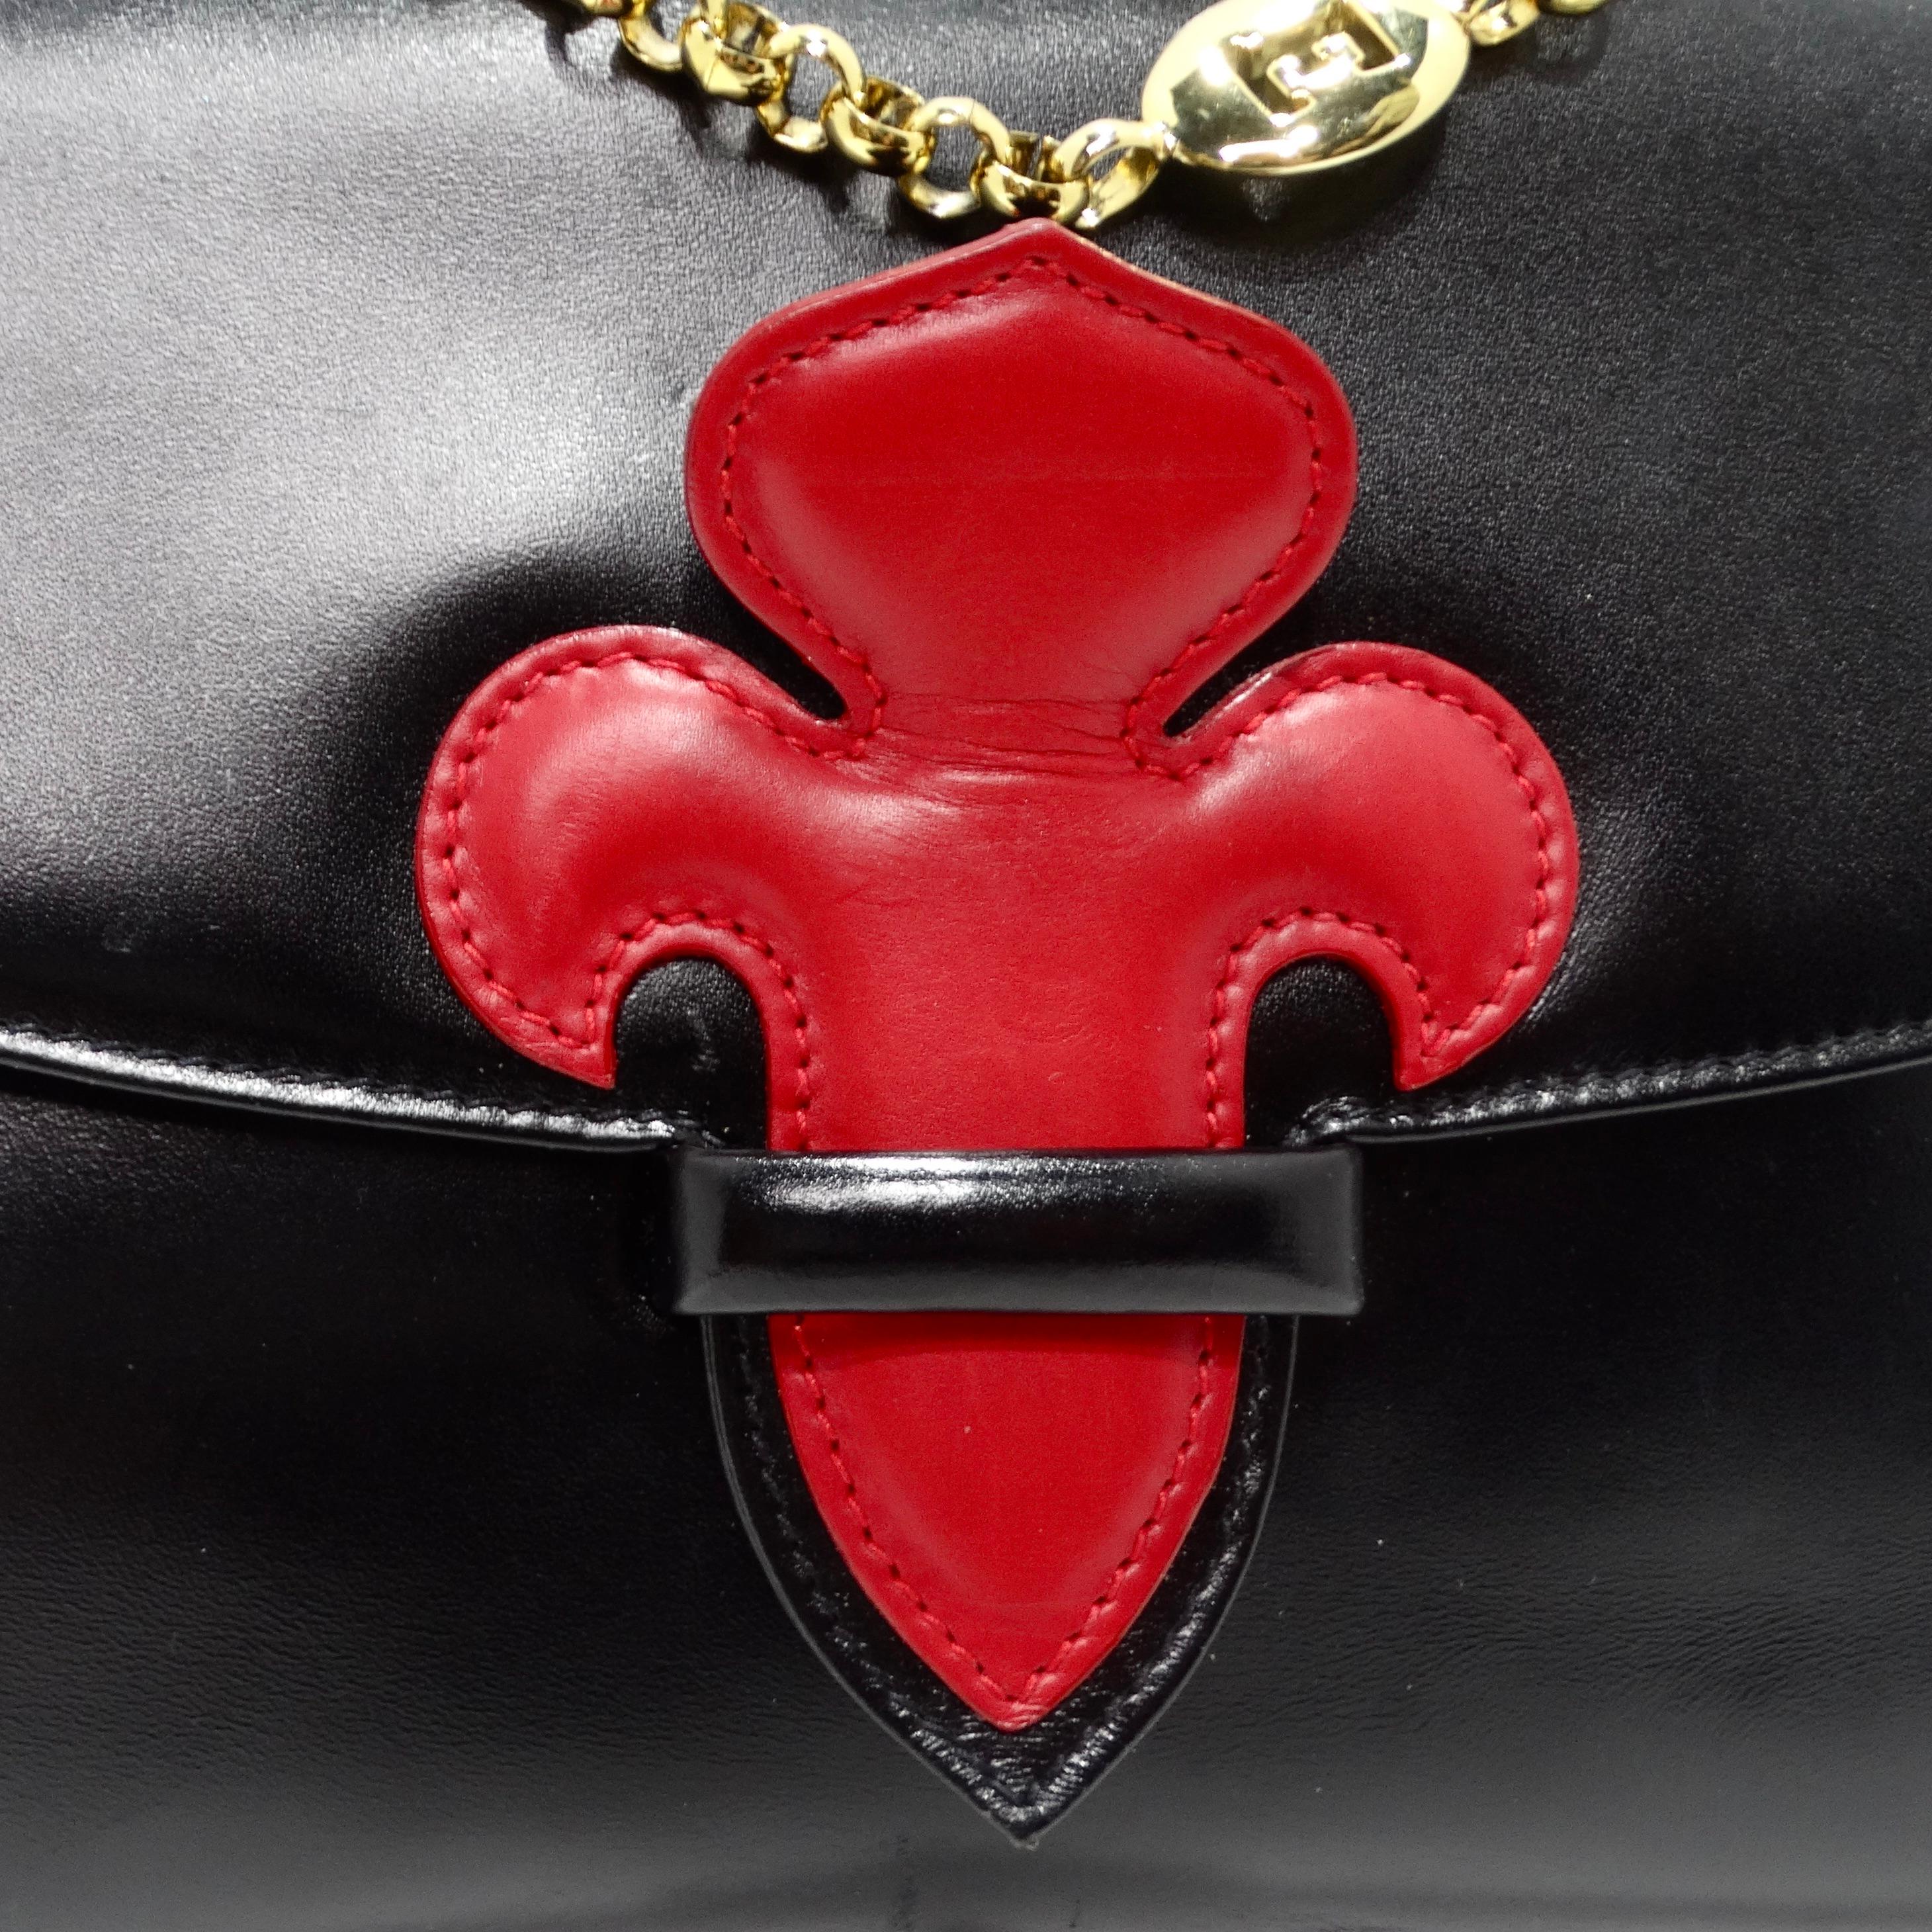 Get your hands on a handbag that is not only an accessory but a work of art - the Escada 1980s Fleur De Lis Black Leather Handbag. This vintage black leather handbag combines classic elegance with a unique design, making it a striking and beautiful